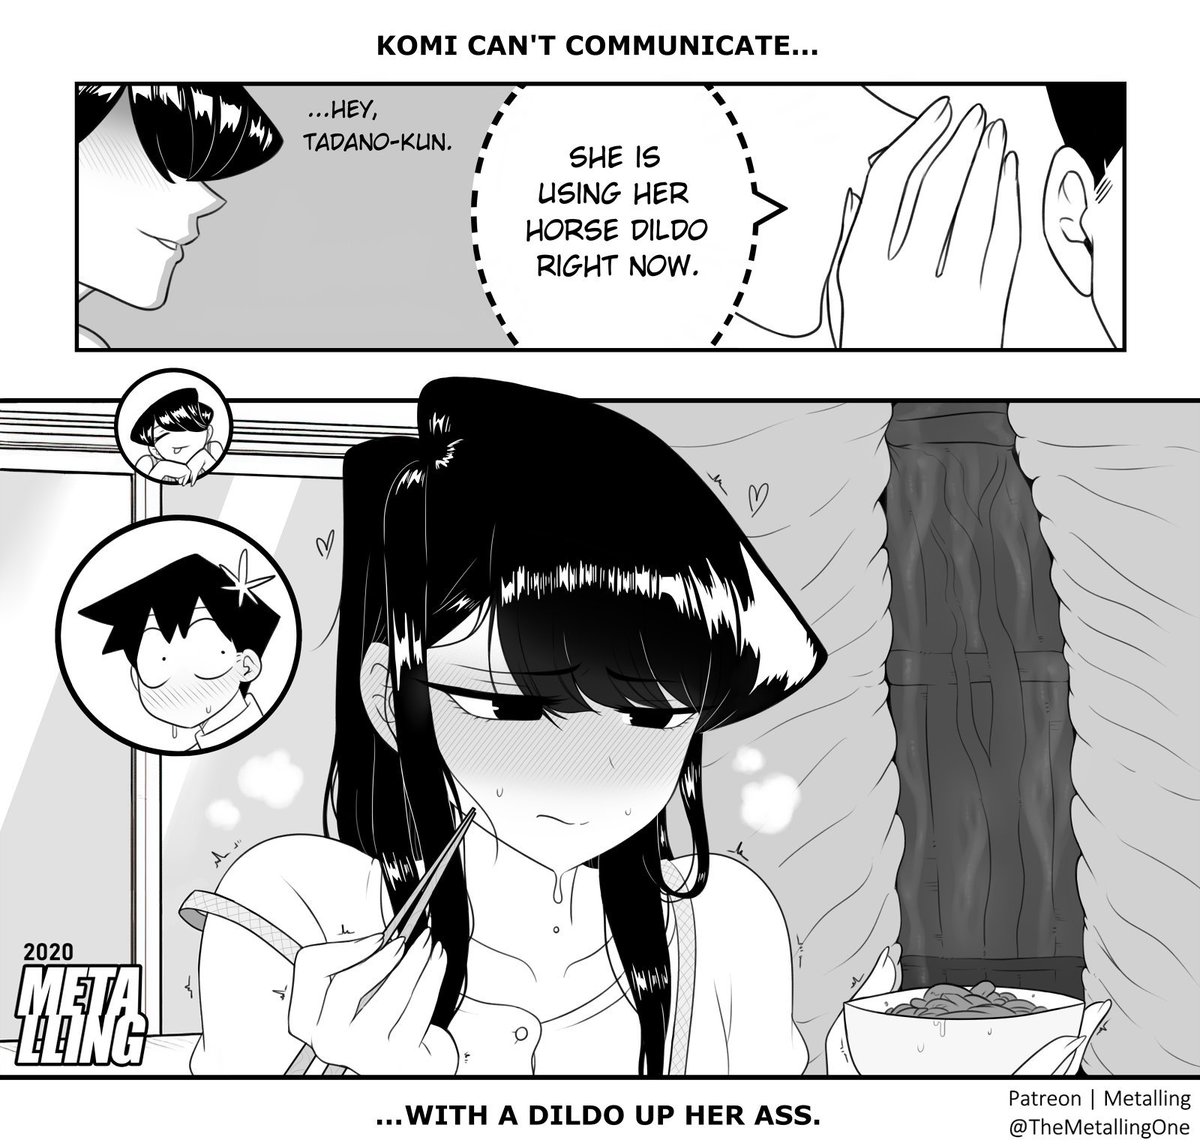 do you think they'll cut this scene from the Komi-san anime adaptation...